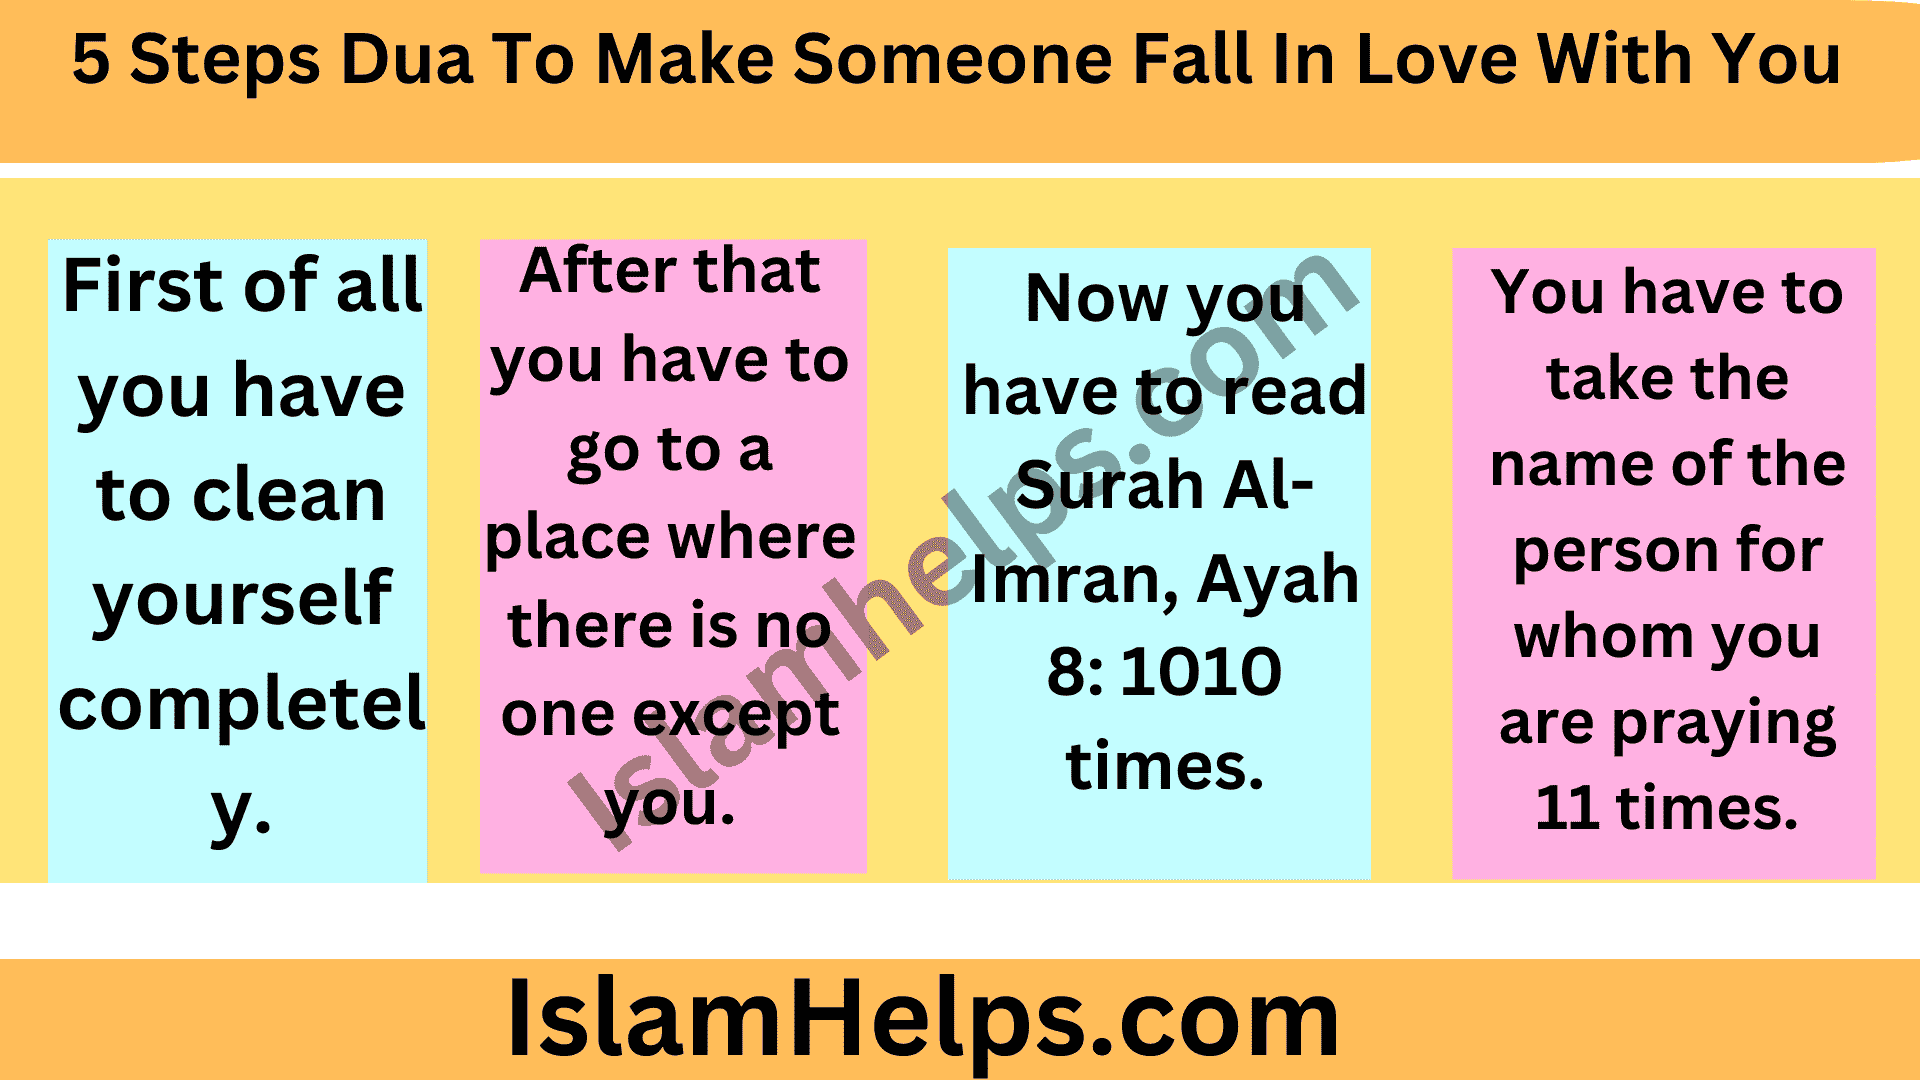 5 Steps dua to make someone fall in love with you